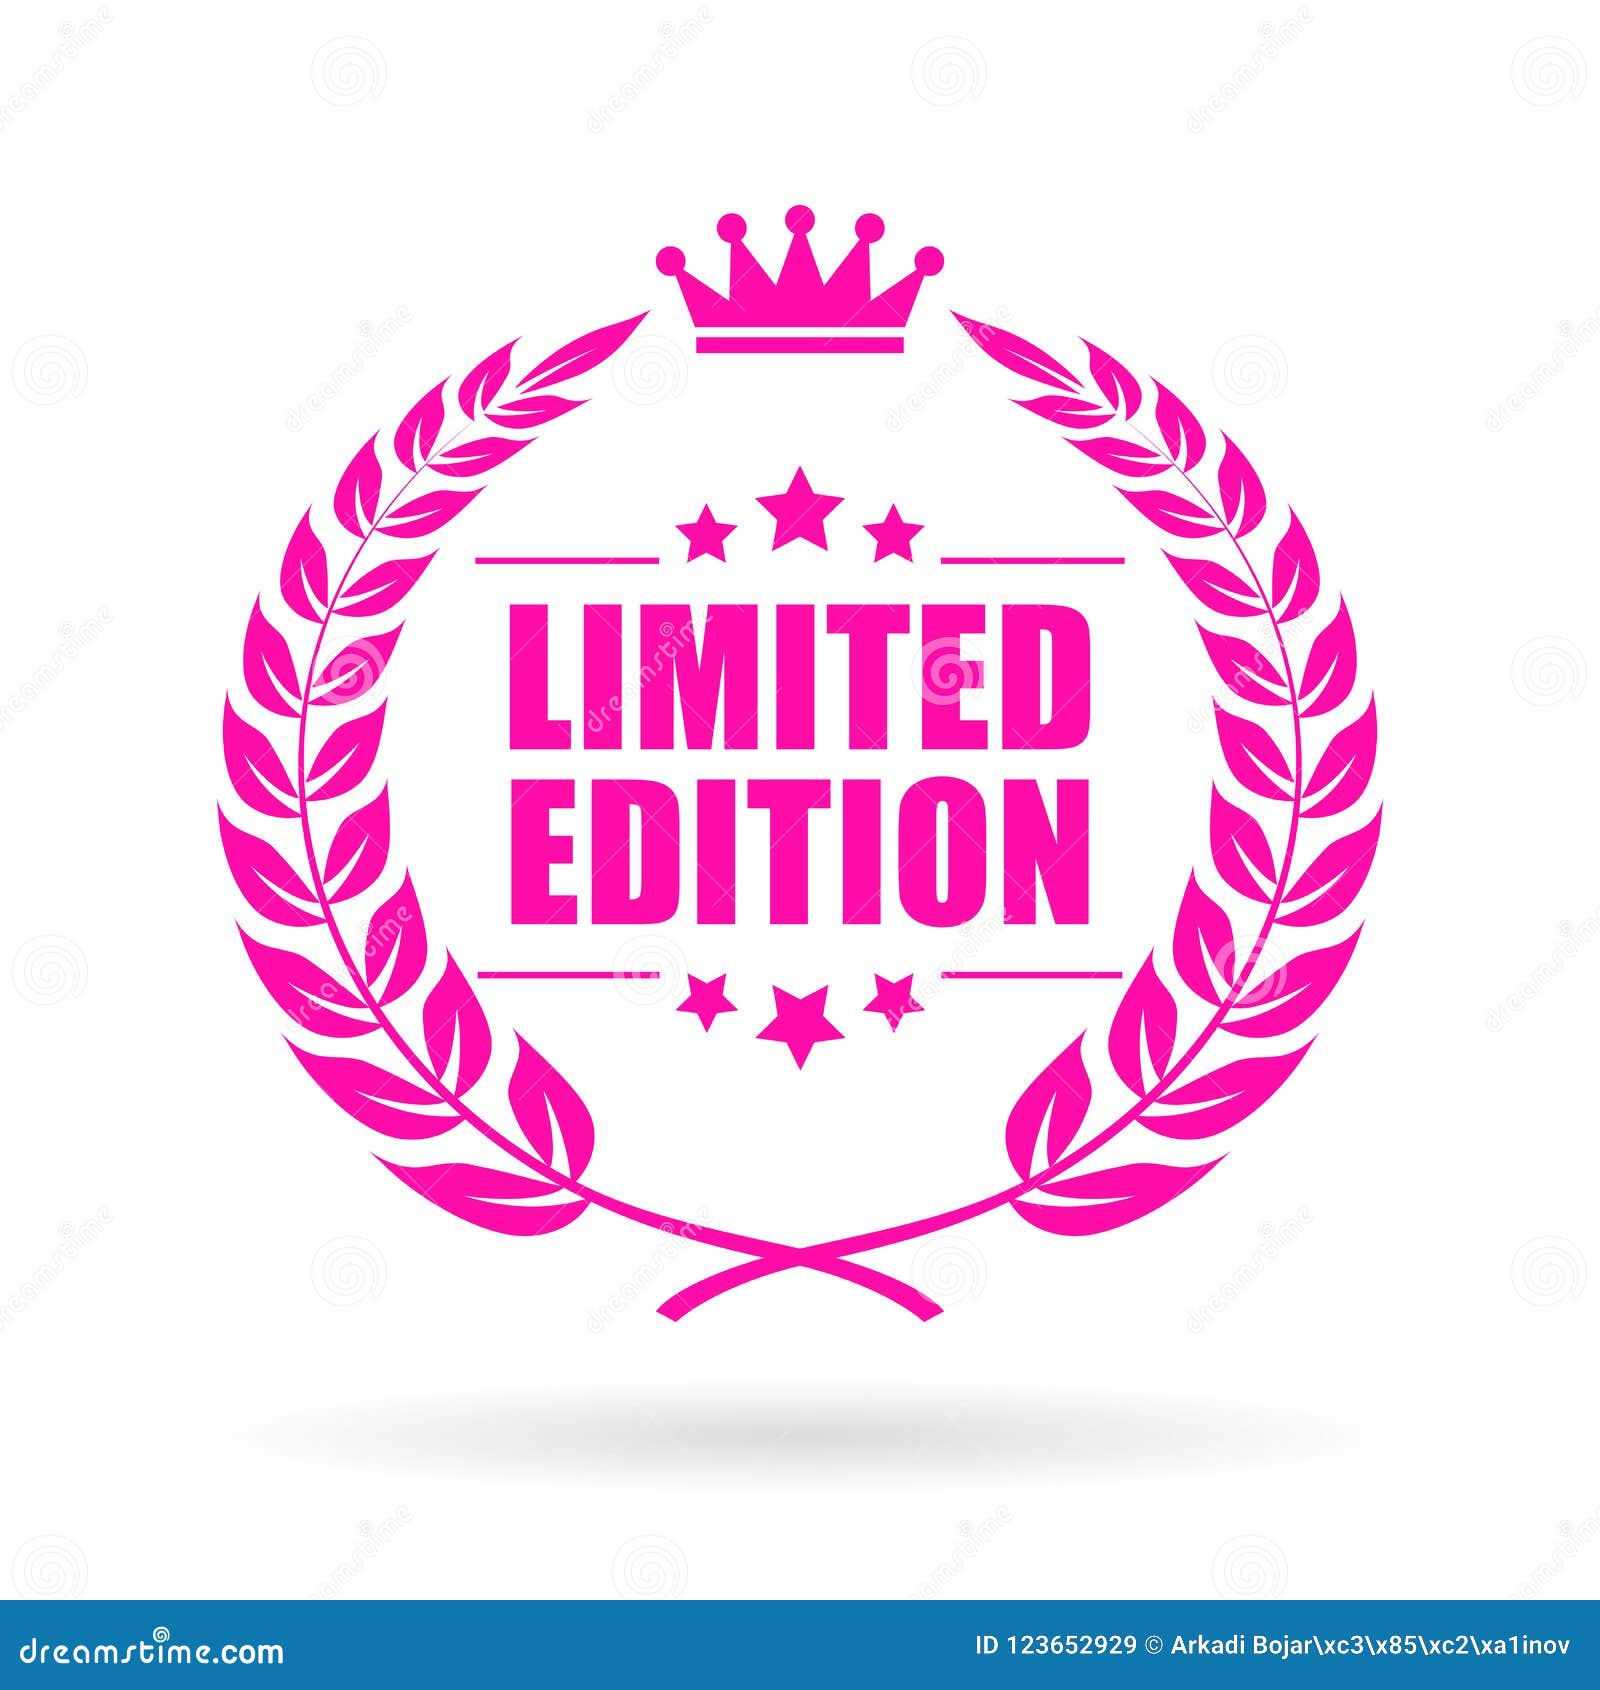 limited edition  icon